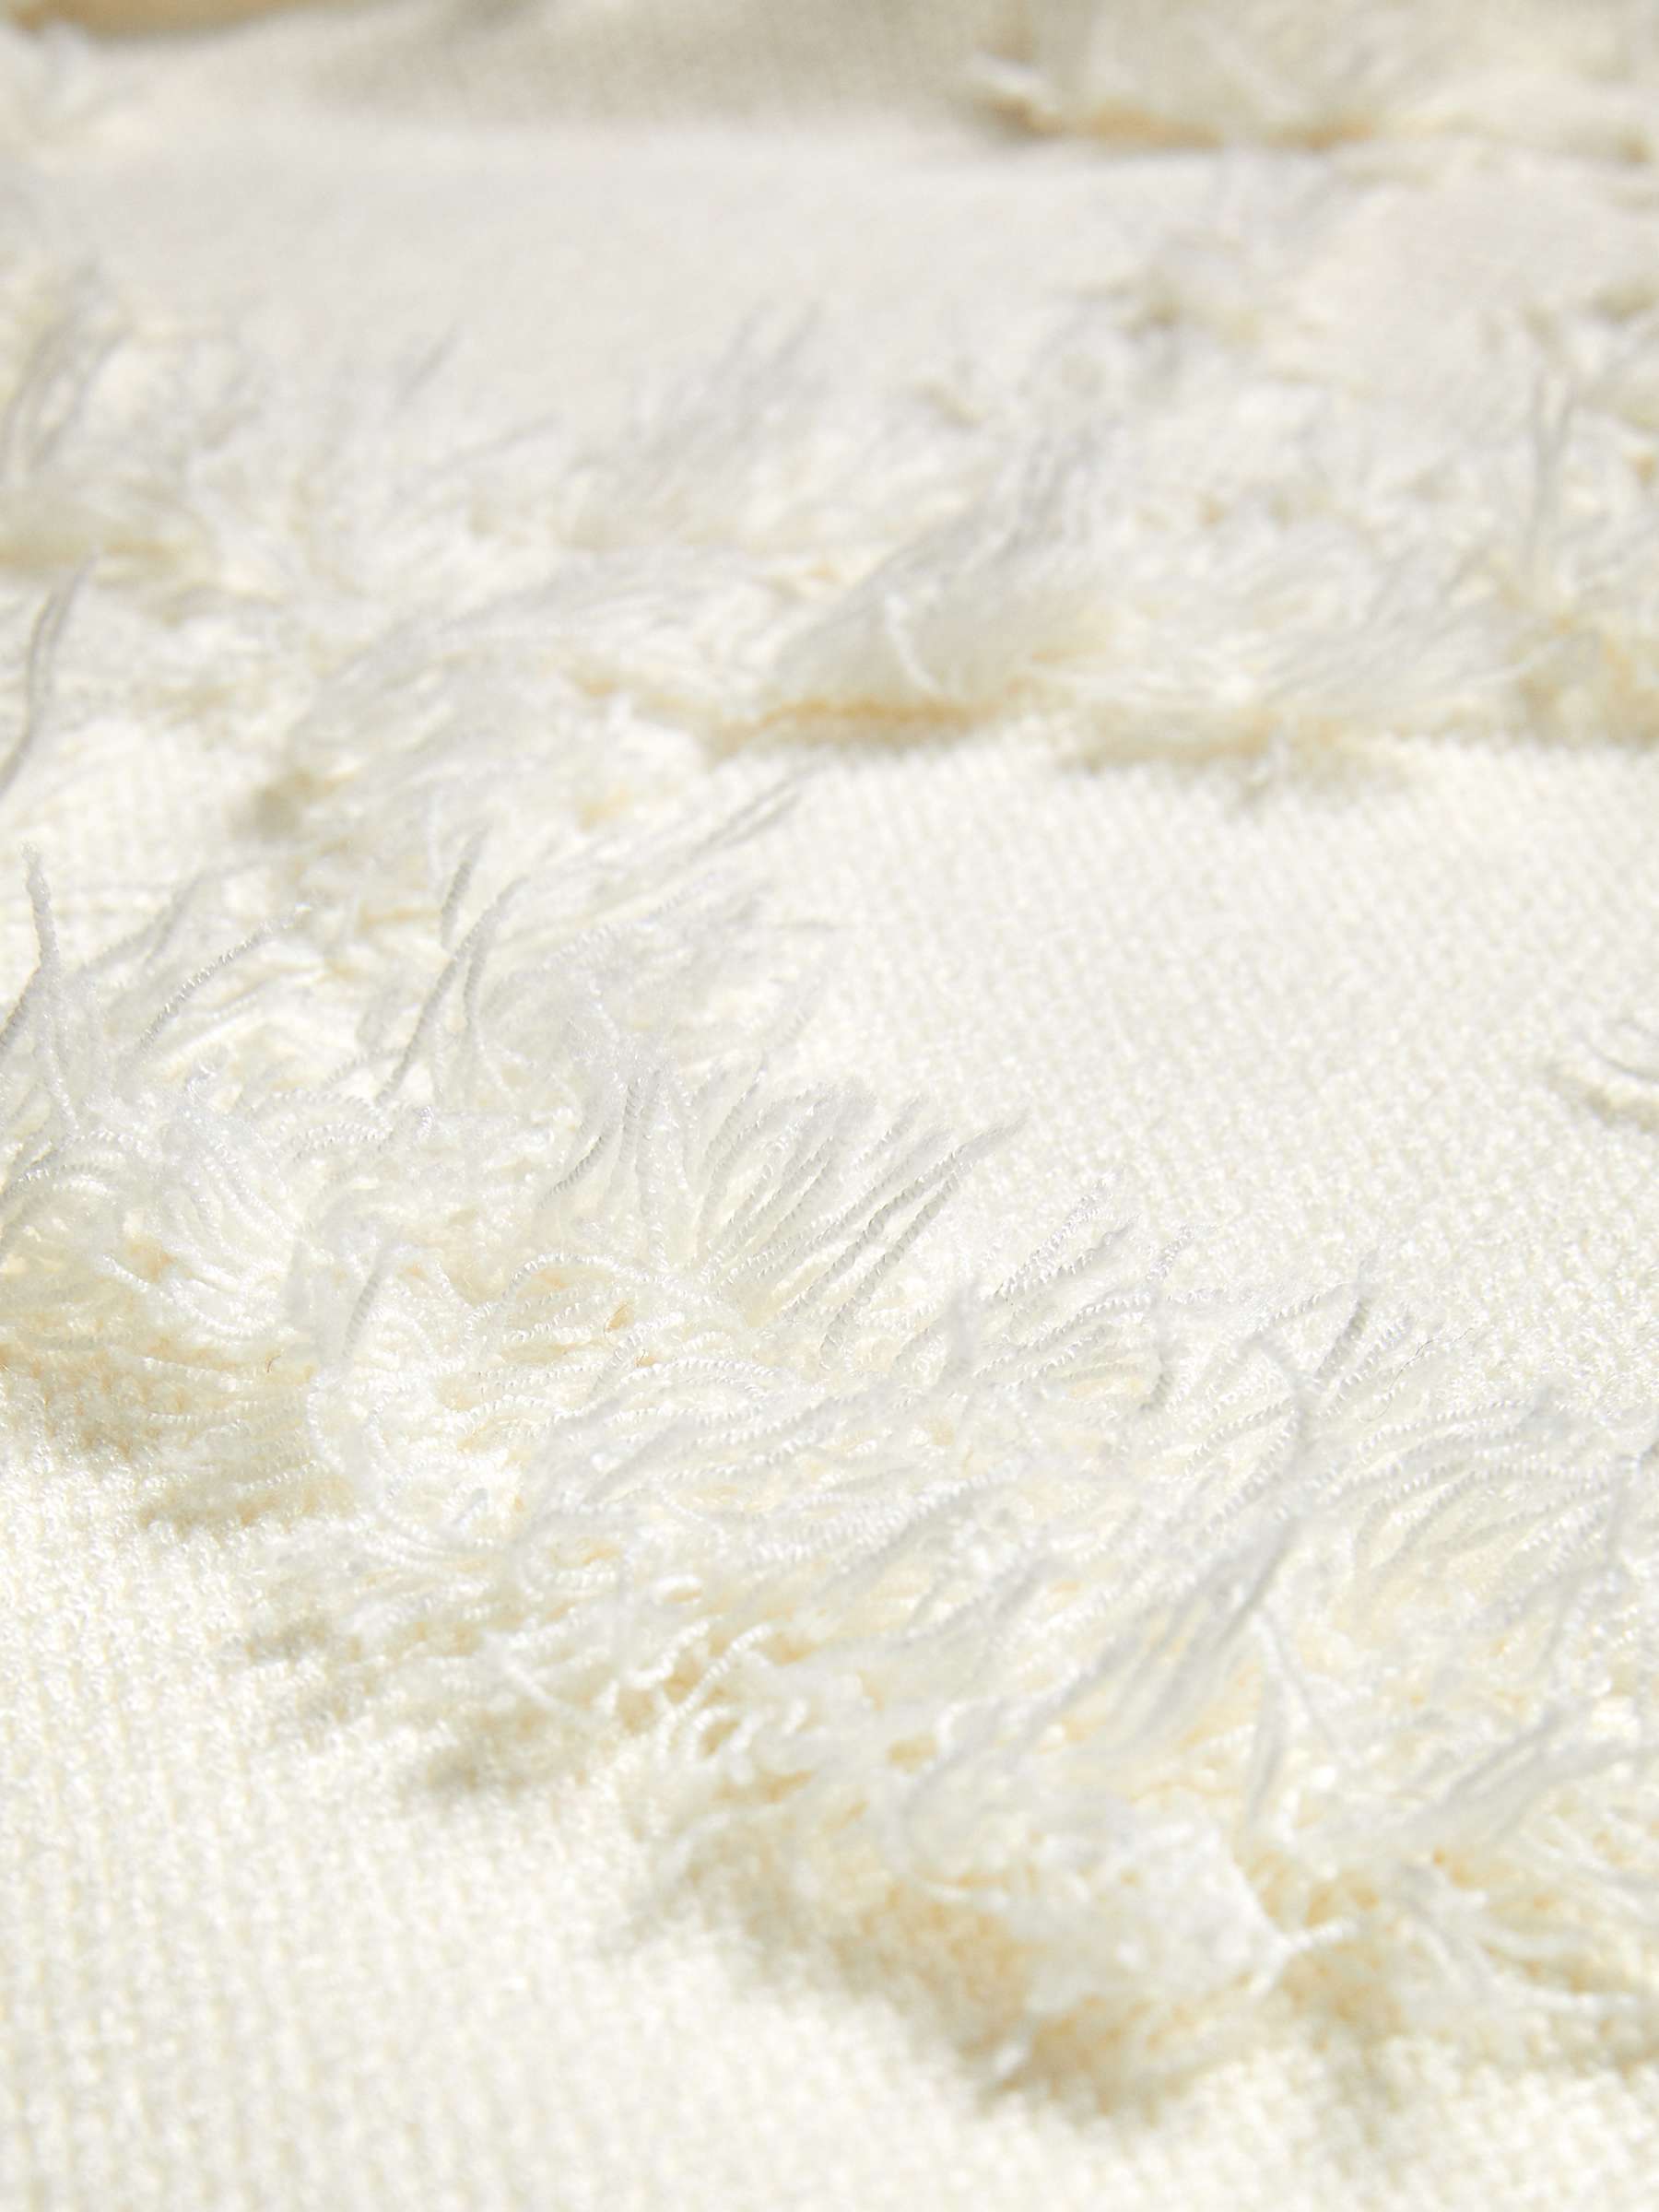 Buy Ted Baker Chalayy Fringed Jacquard Placement Sweater, Ivory Online at johnlewis.com